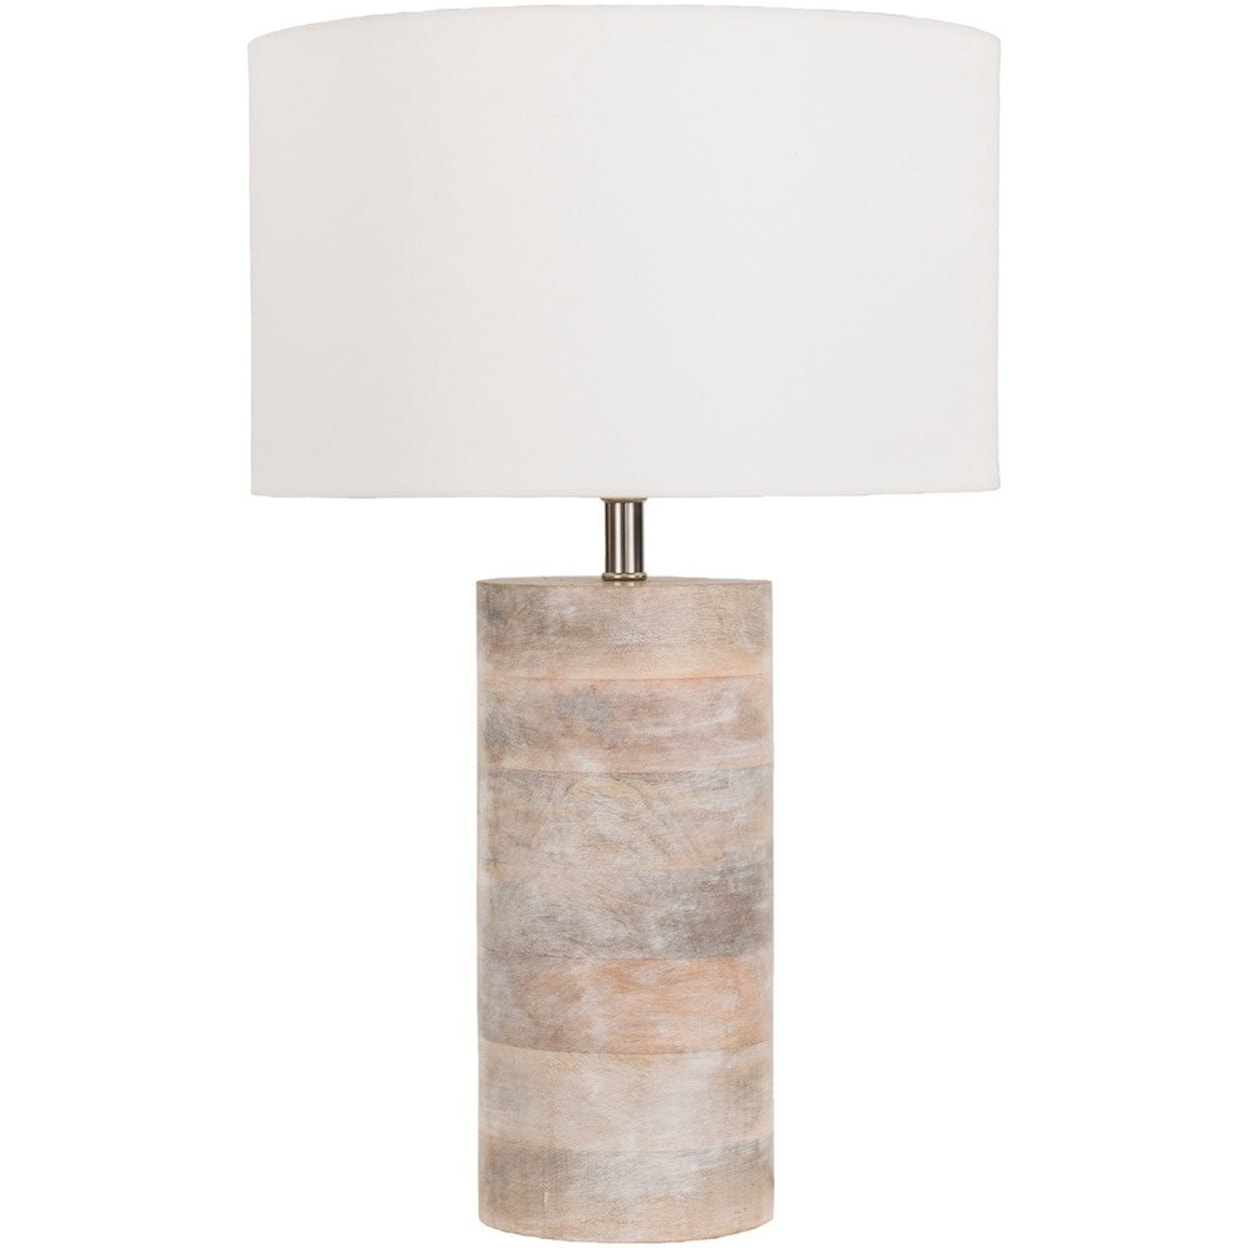 Surya Arbor Natural Finish Contemporary Table Lamp